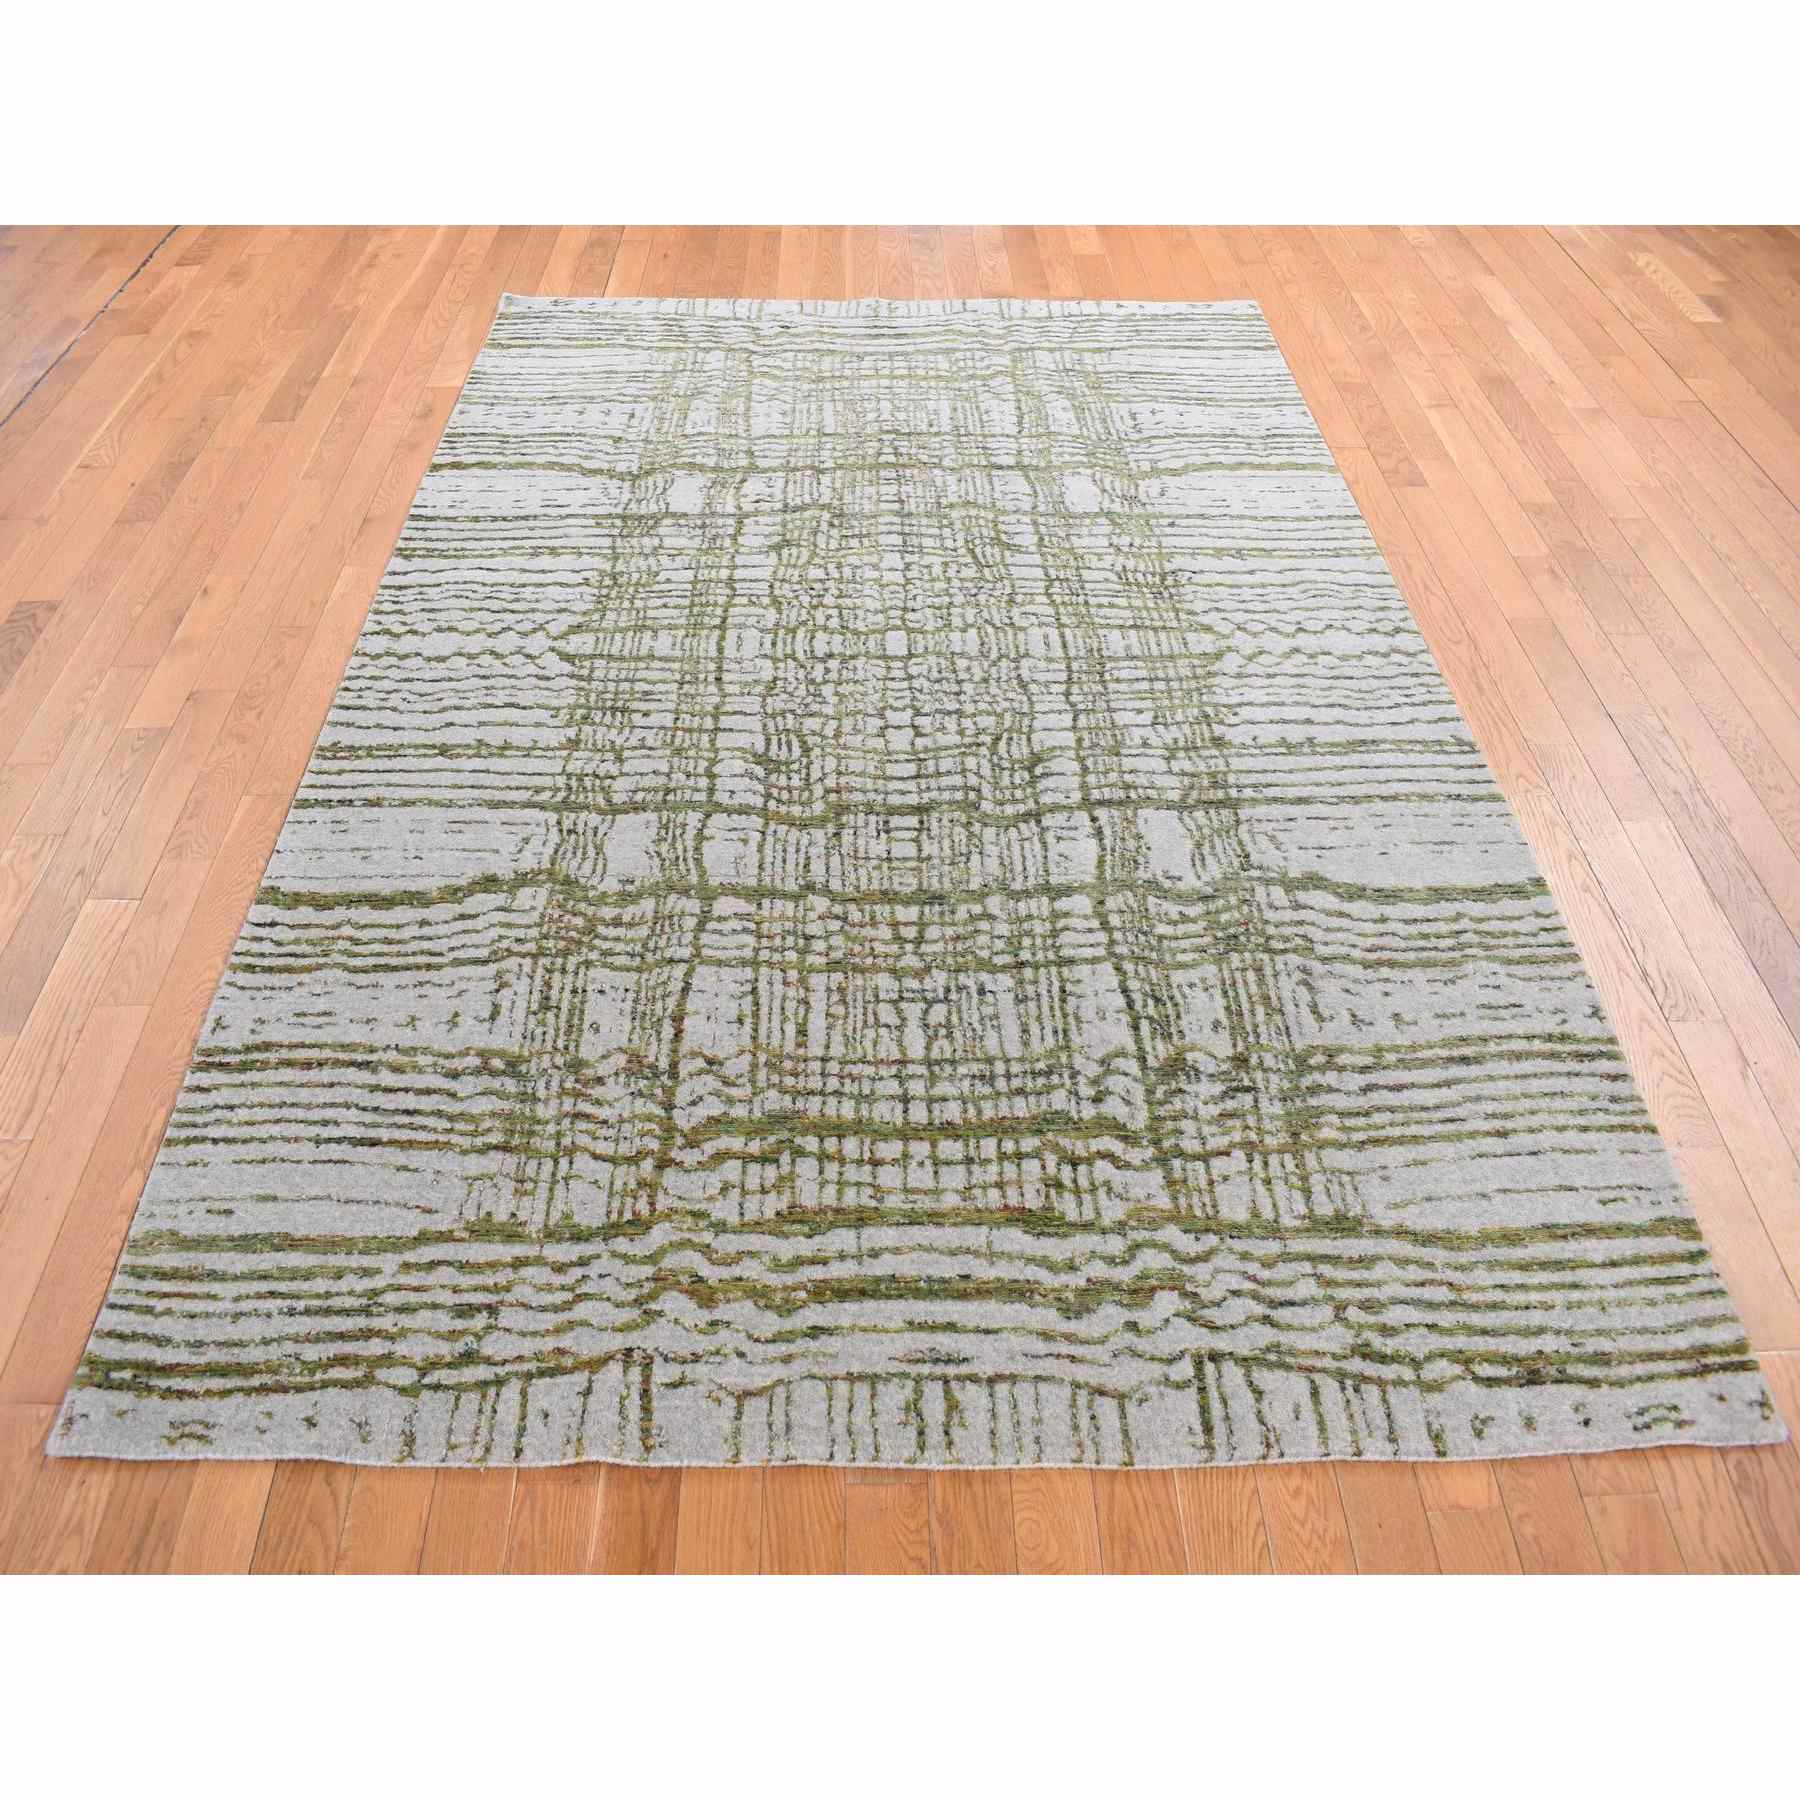 Modern-and-Contemporary-Hand-Loomed-Rug-437900